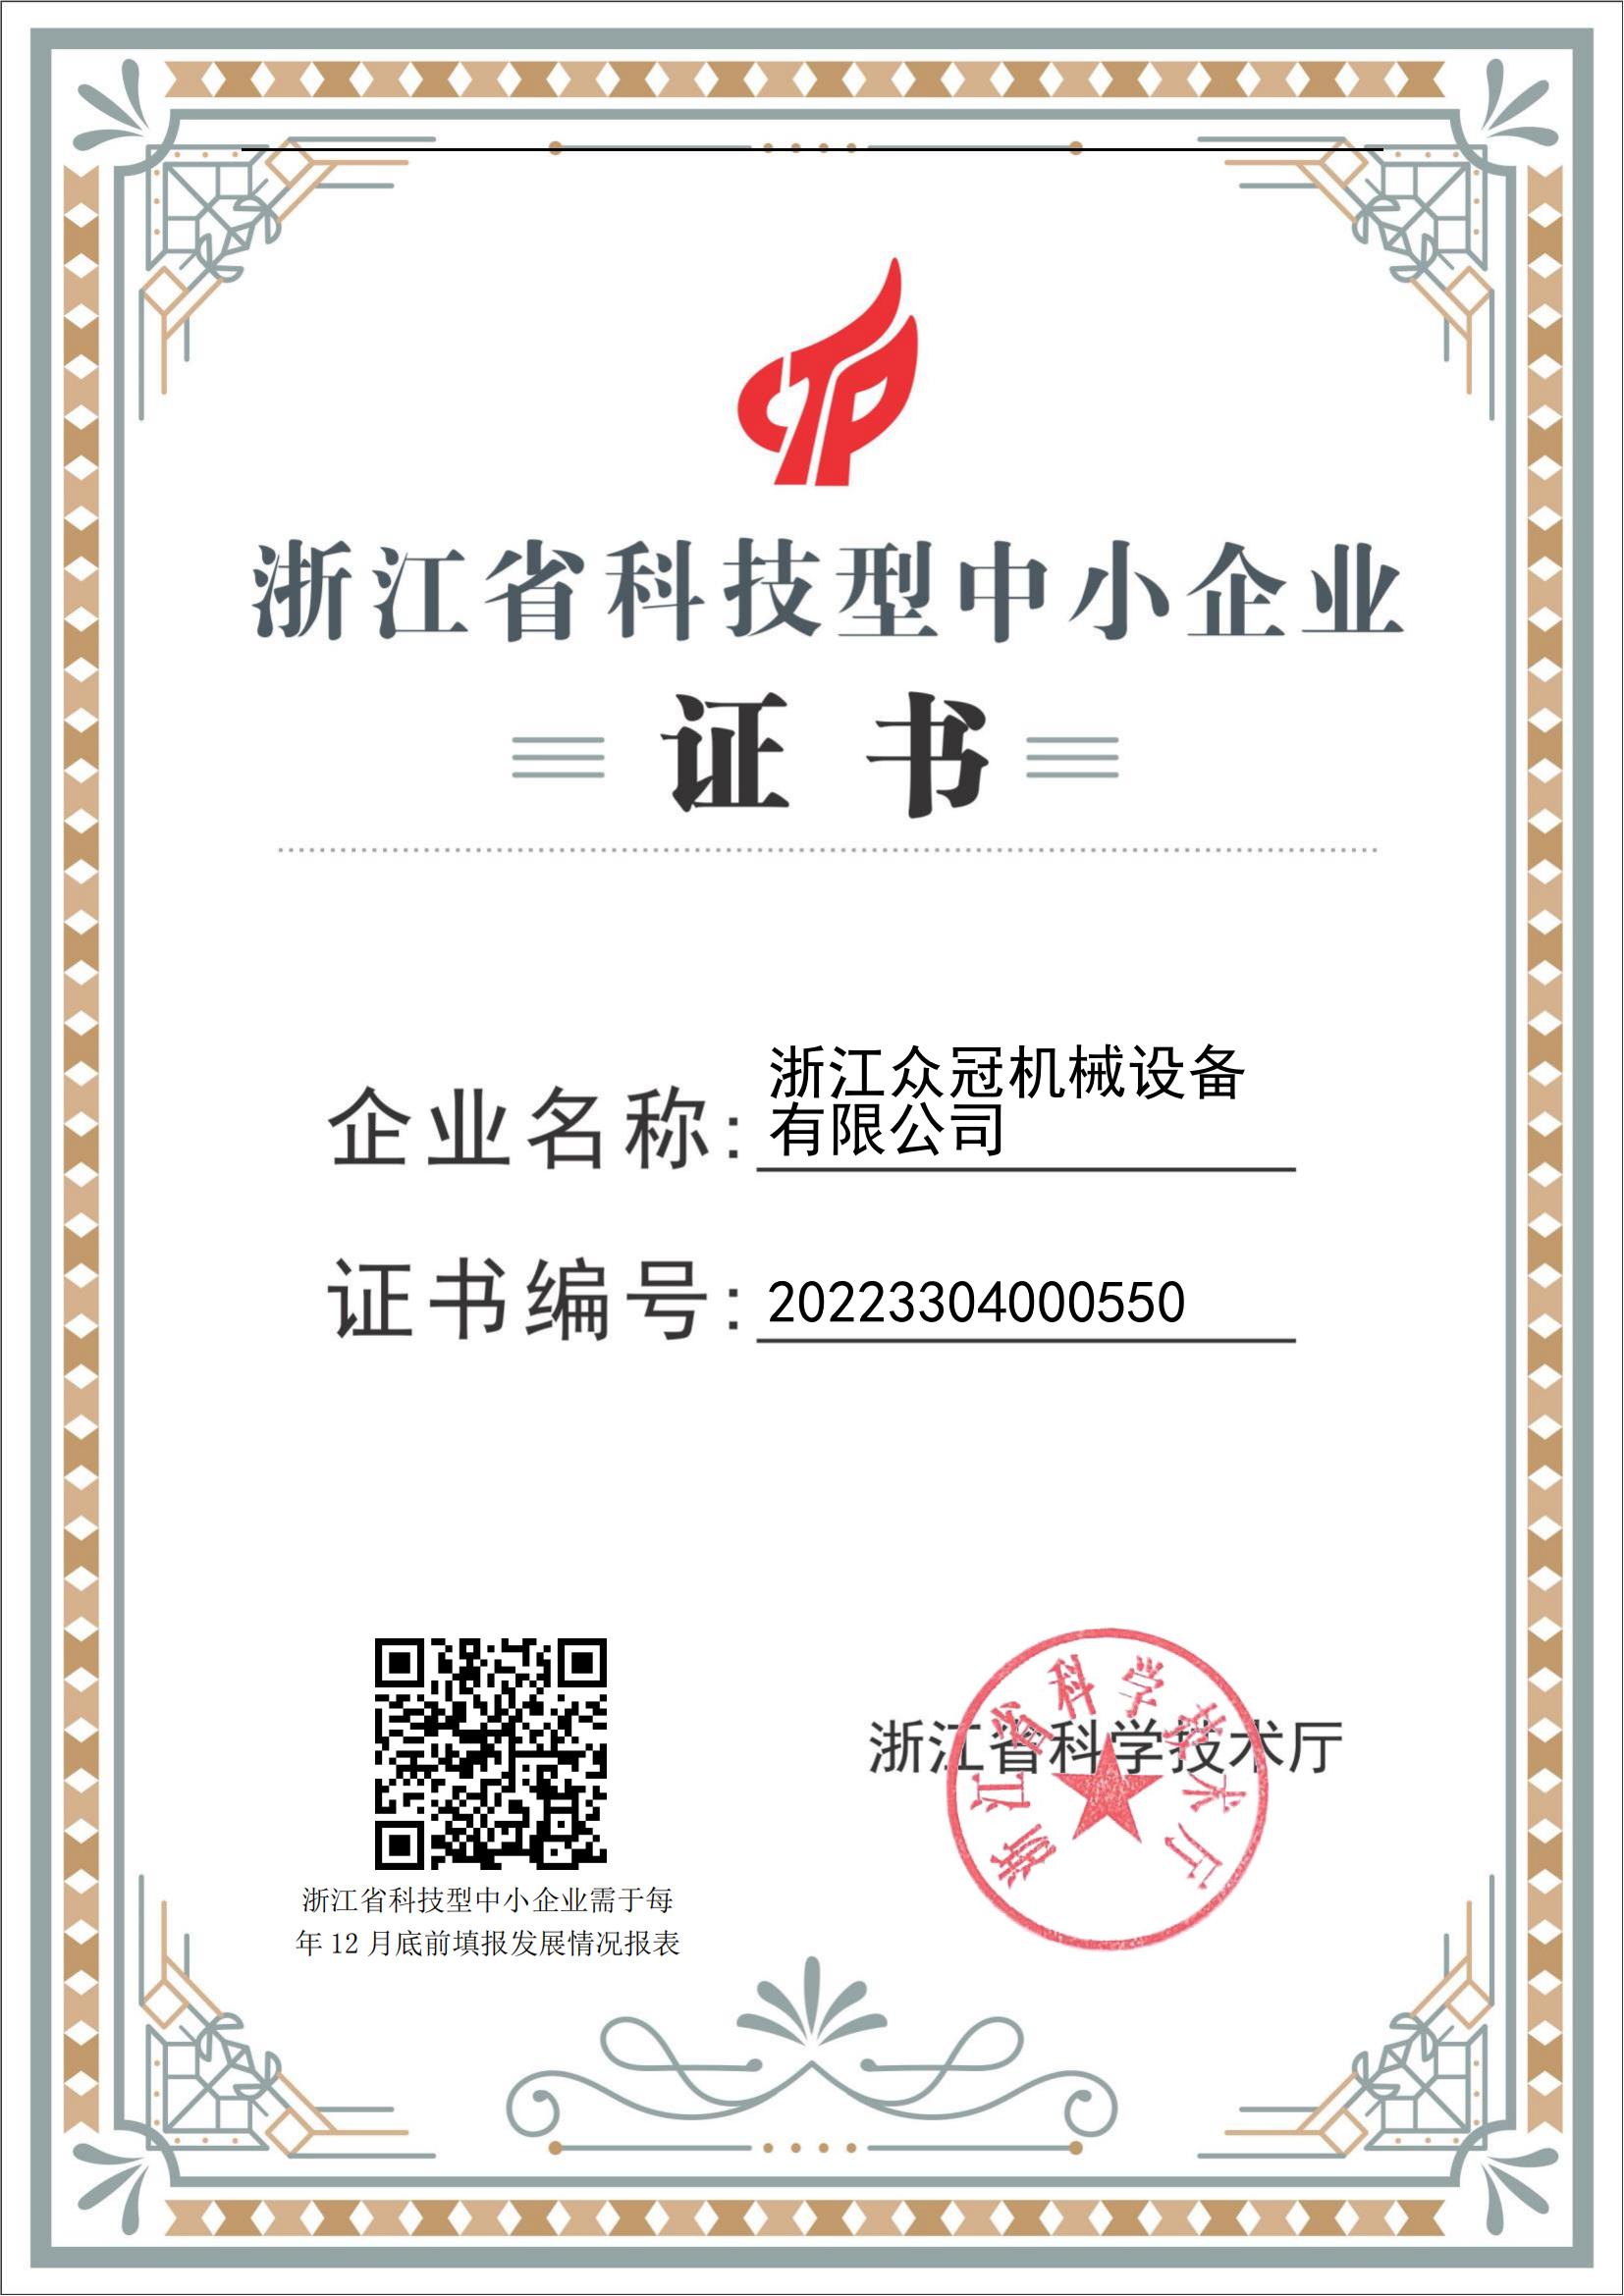 Certificate: Zhejiang Science and Technology SME Certificate